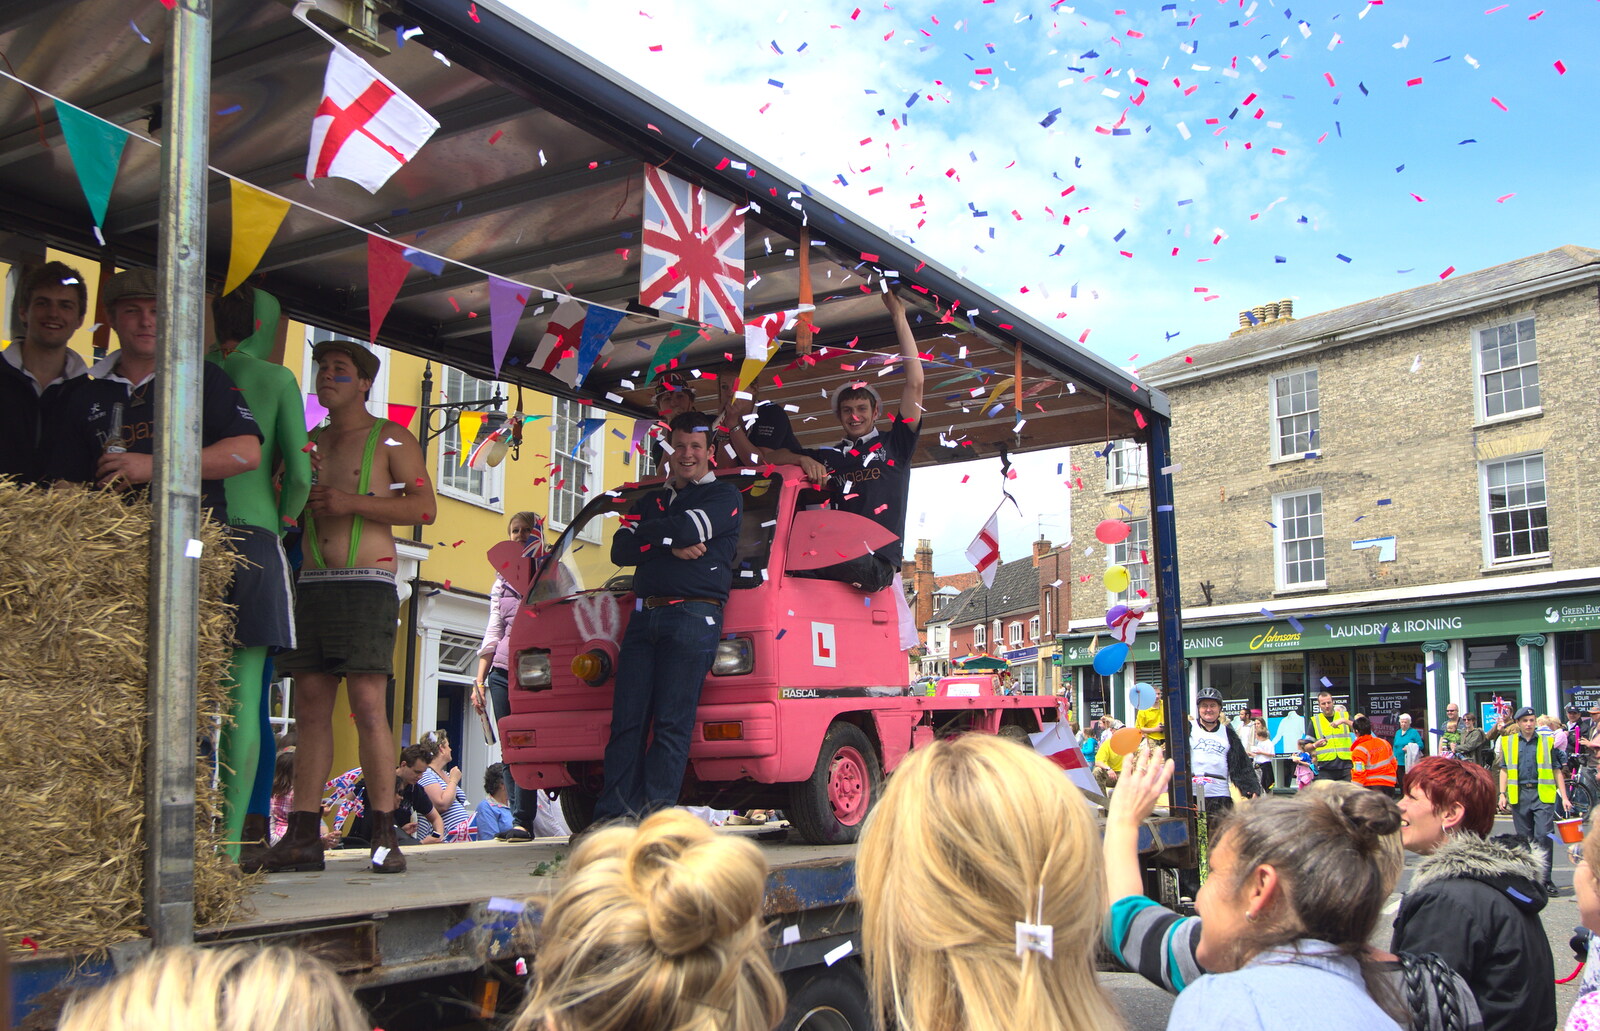 An explosion of confetti from Morris Dancing and a Carnival Procession, Diss, Norfolk - 17th June 2012